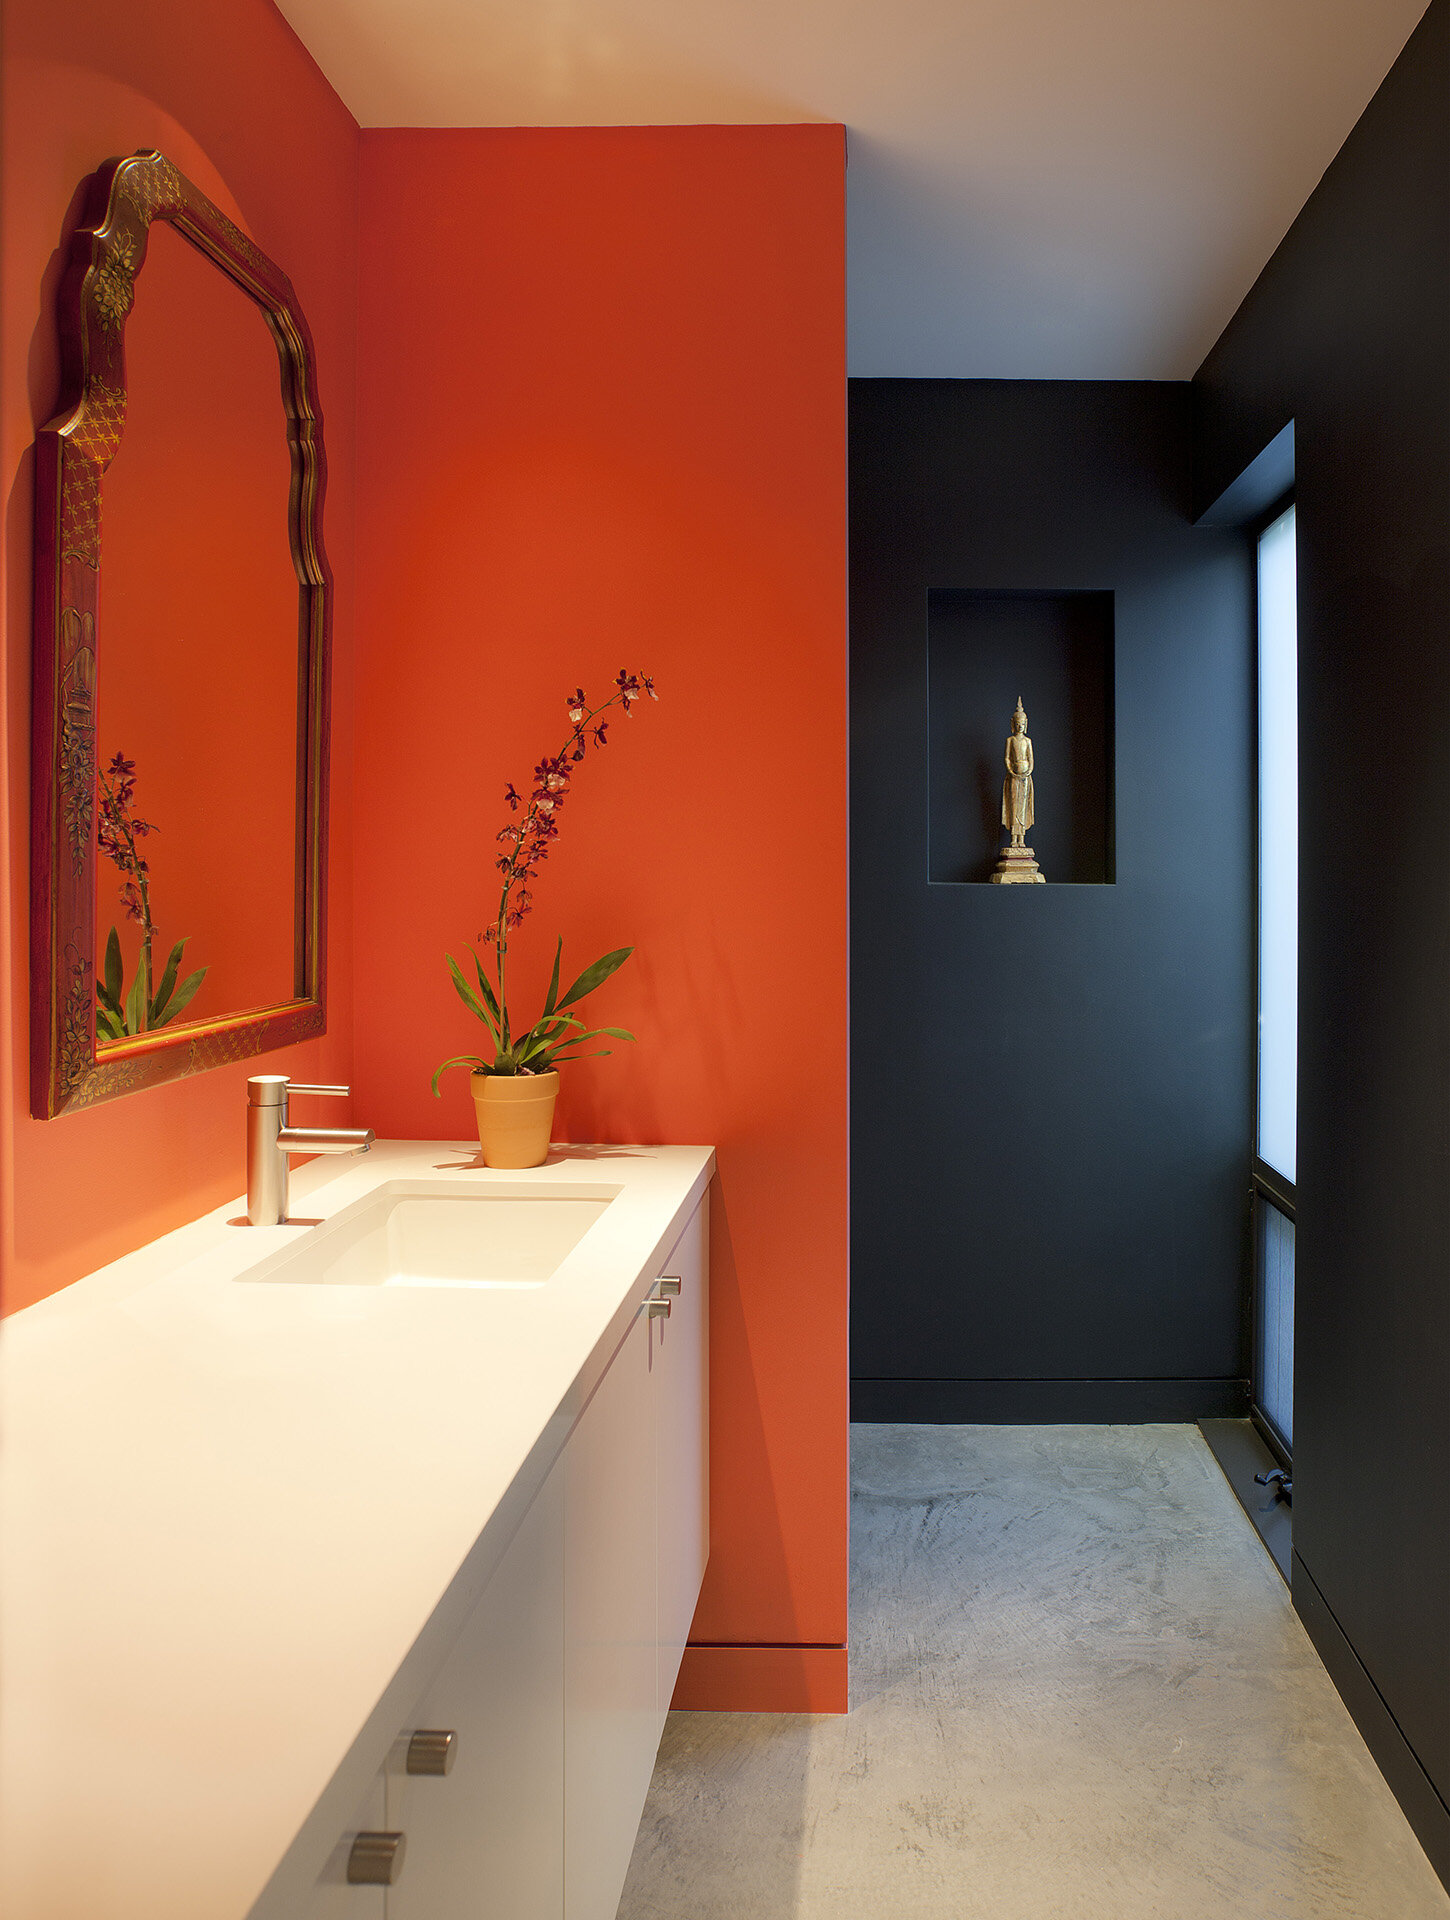  Top best luxury general contracting company modern home in a canyon neighborhood of Los Angeles featuring iconic design by architect Chu and Gooding featuring mid century style bathroom with orange and black walls.  